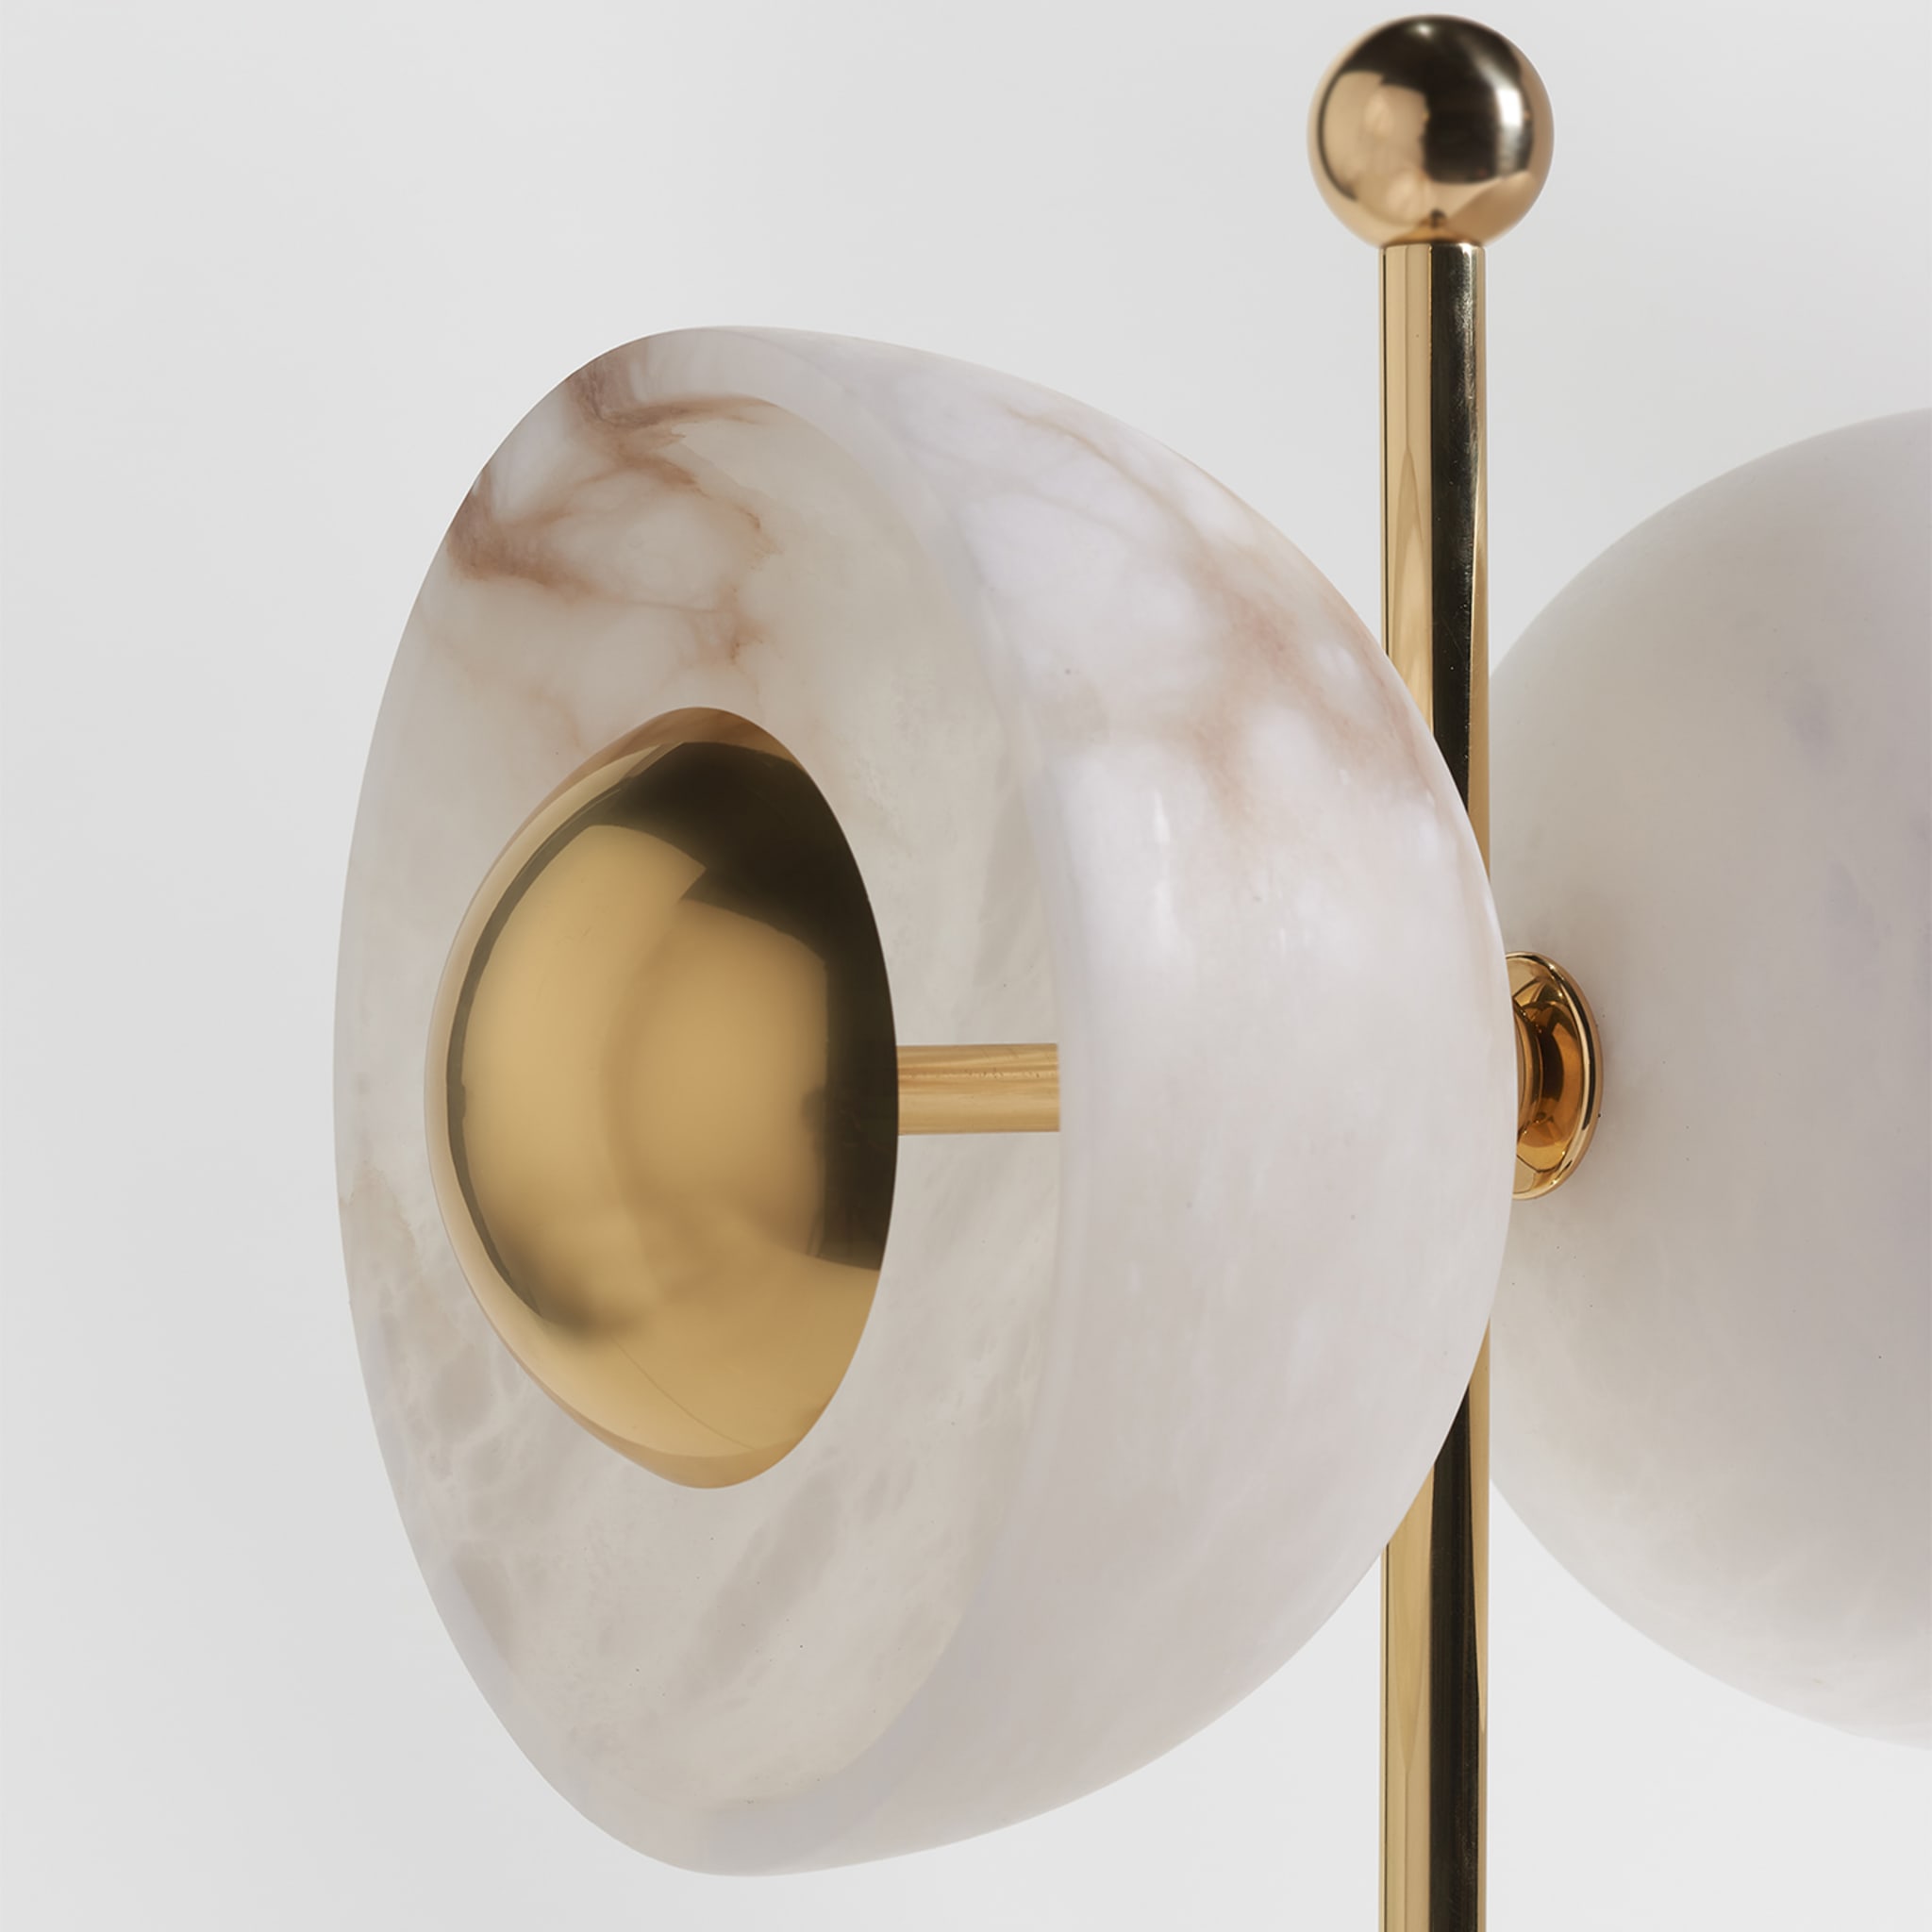 "Butterfly" Table Lamp in Polished Brass and Alabaster - Alternative view 1